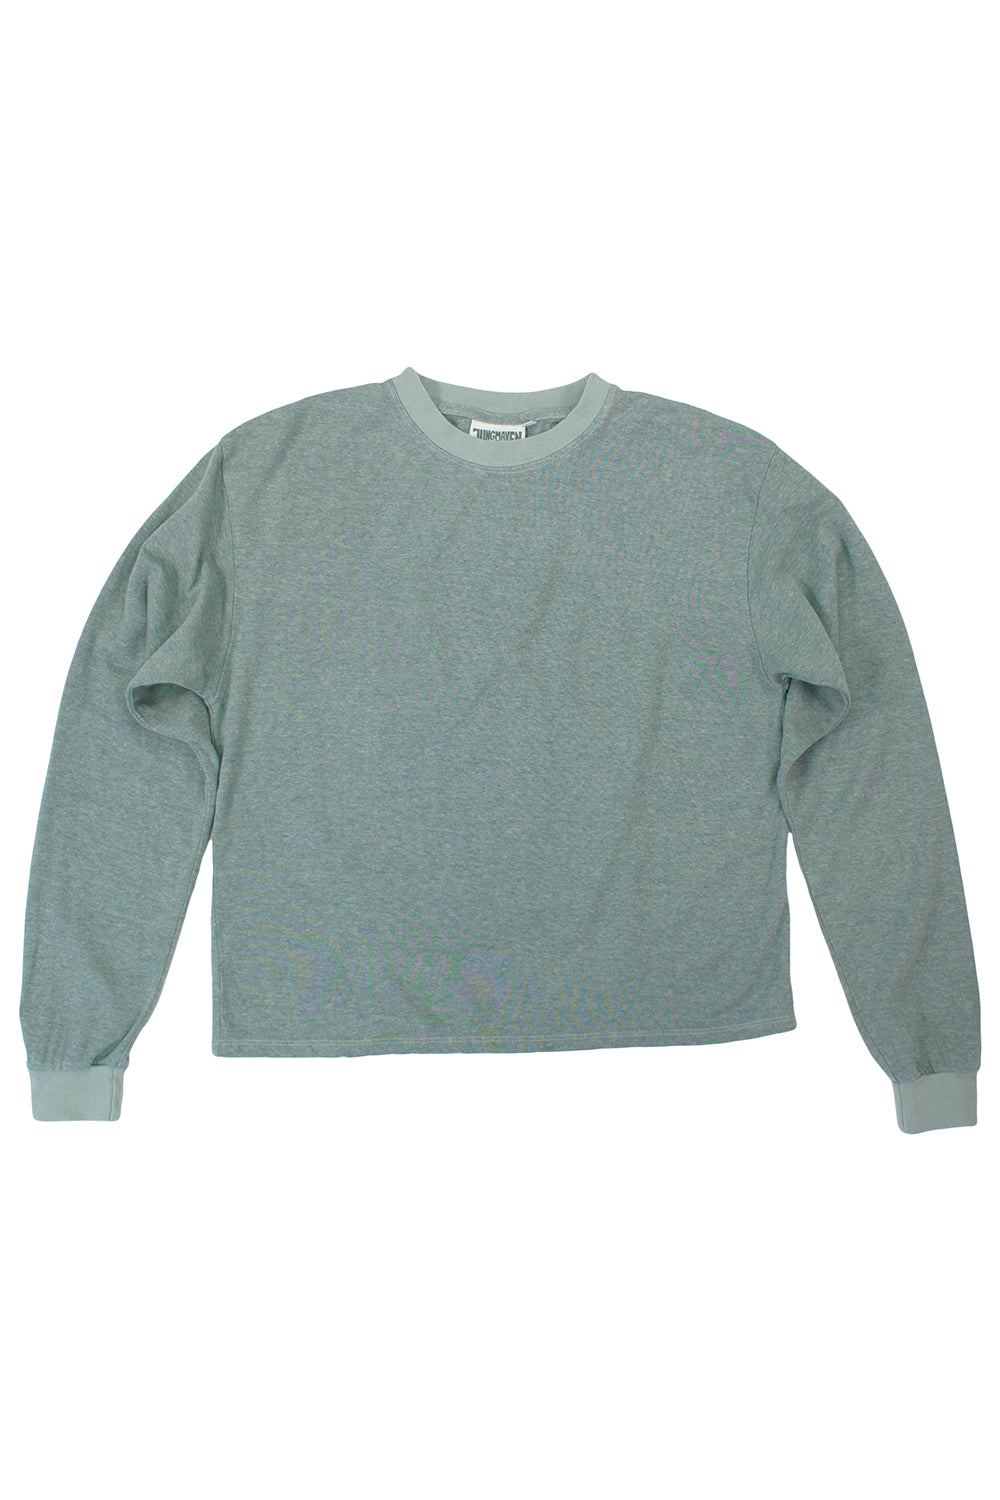 Tatoosh Cropped Long Sleeve Tee | Jungmaven Hemp Clothing & Accessories / Color: Clay Green